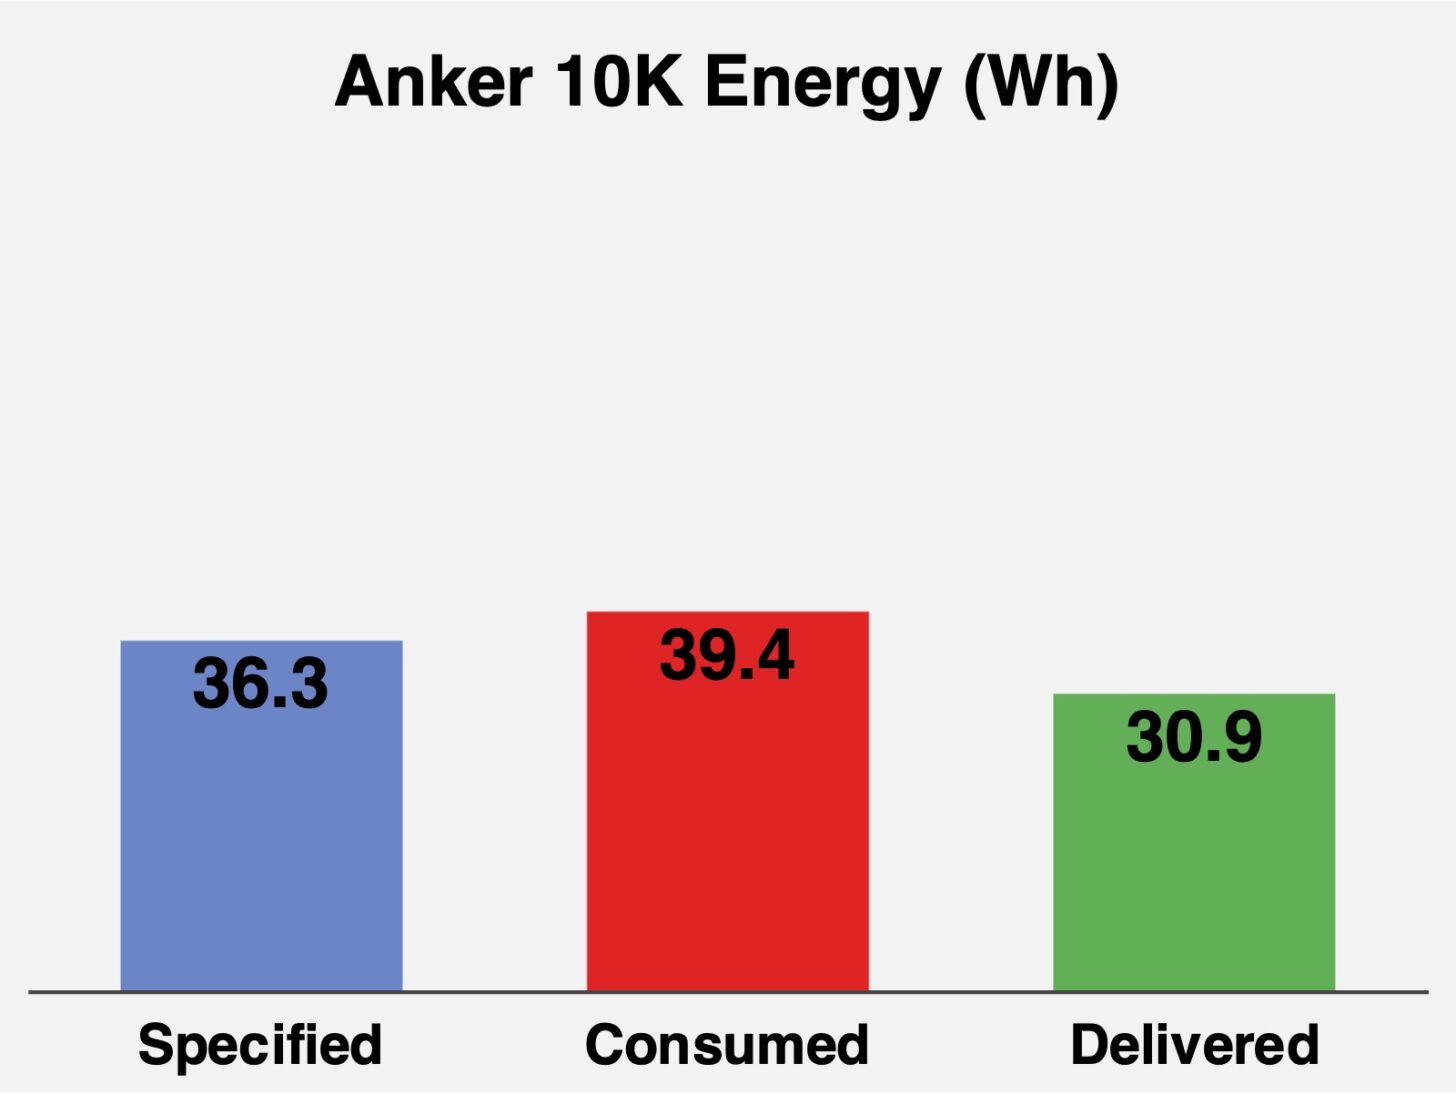 Chart comparing Anker 10K energy specified by the manufacturer, consumed during recharging, and delivered by the USB-C port, in watt-hours.